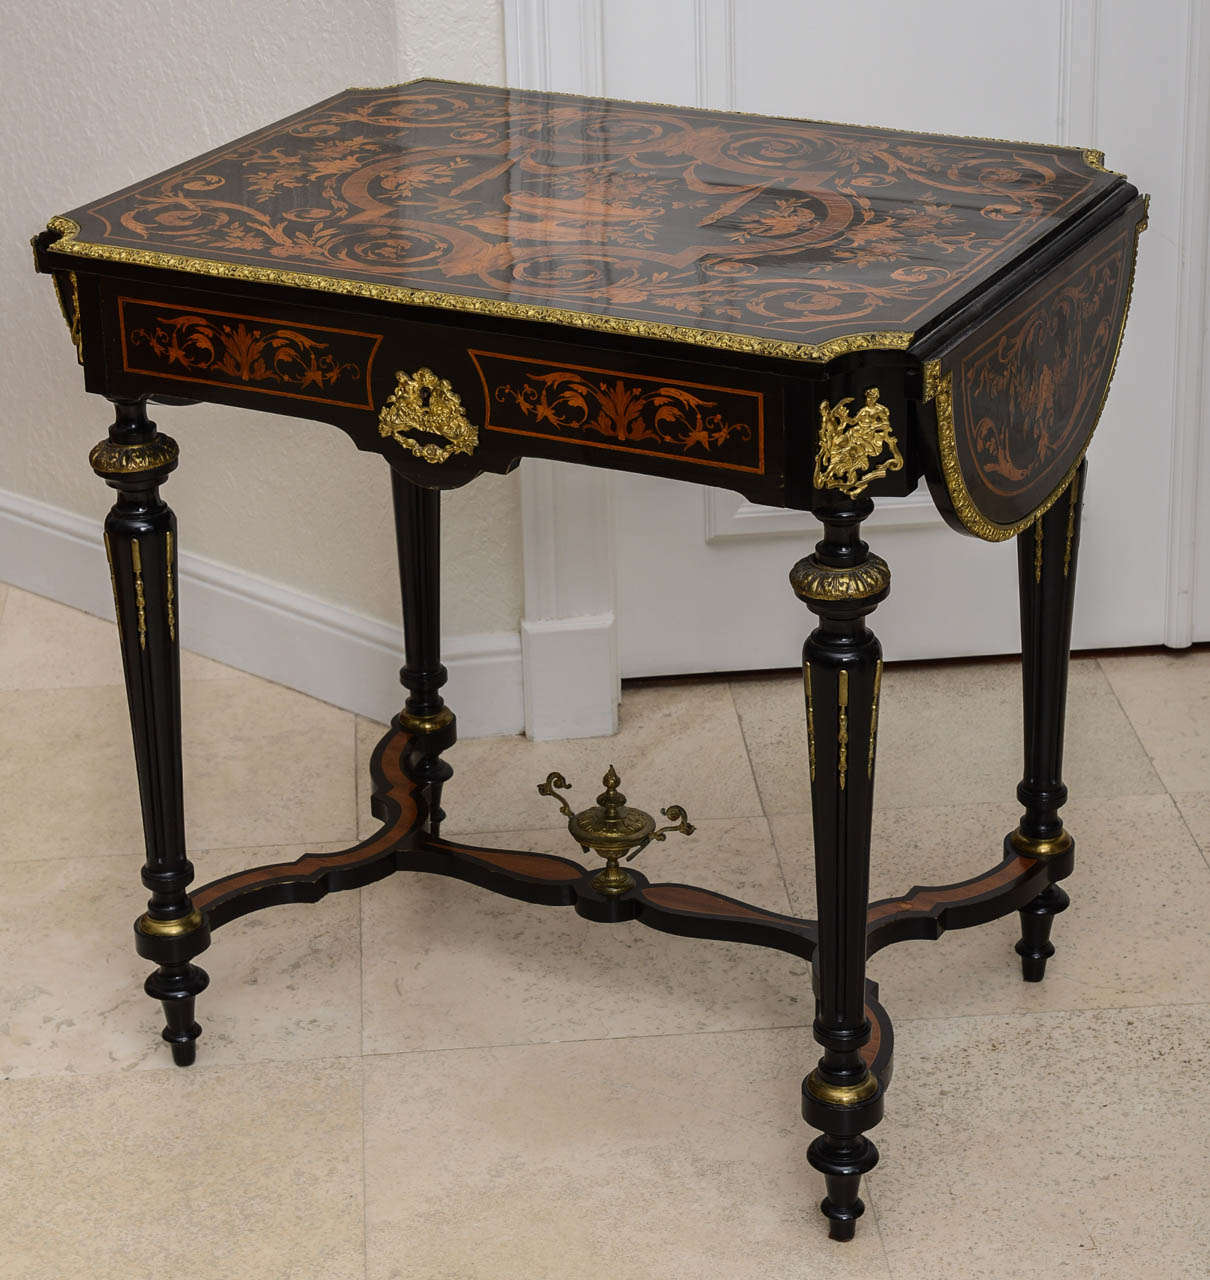 Napoleon III French Drop-Leaf Center Table, Vanity, or Desk from the 19th Century For Sale